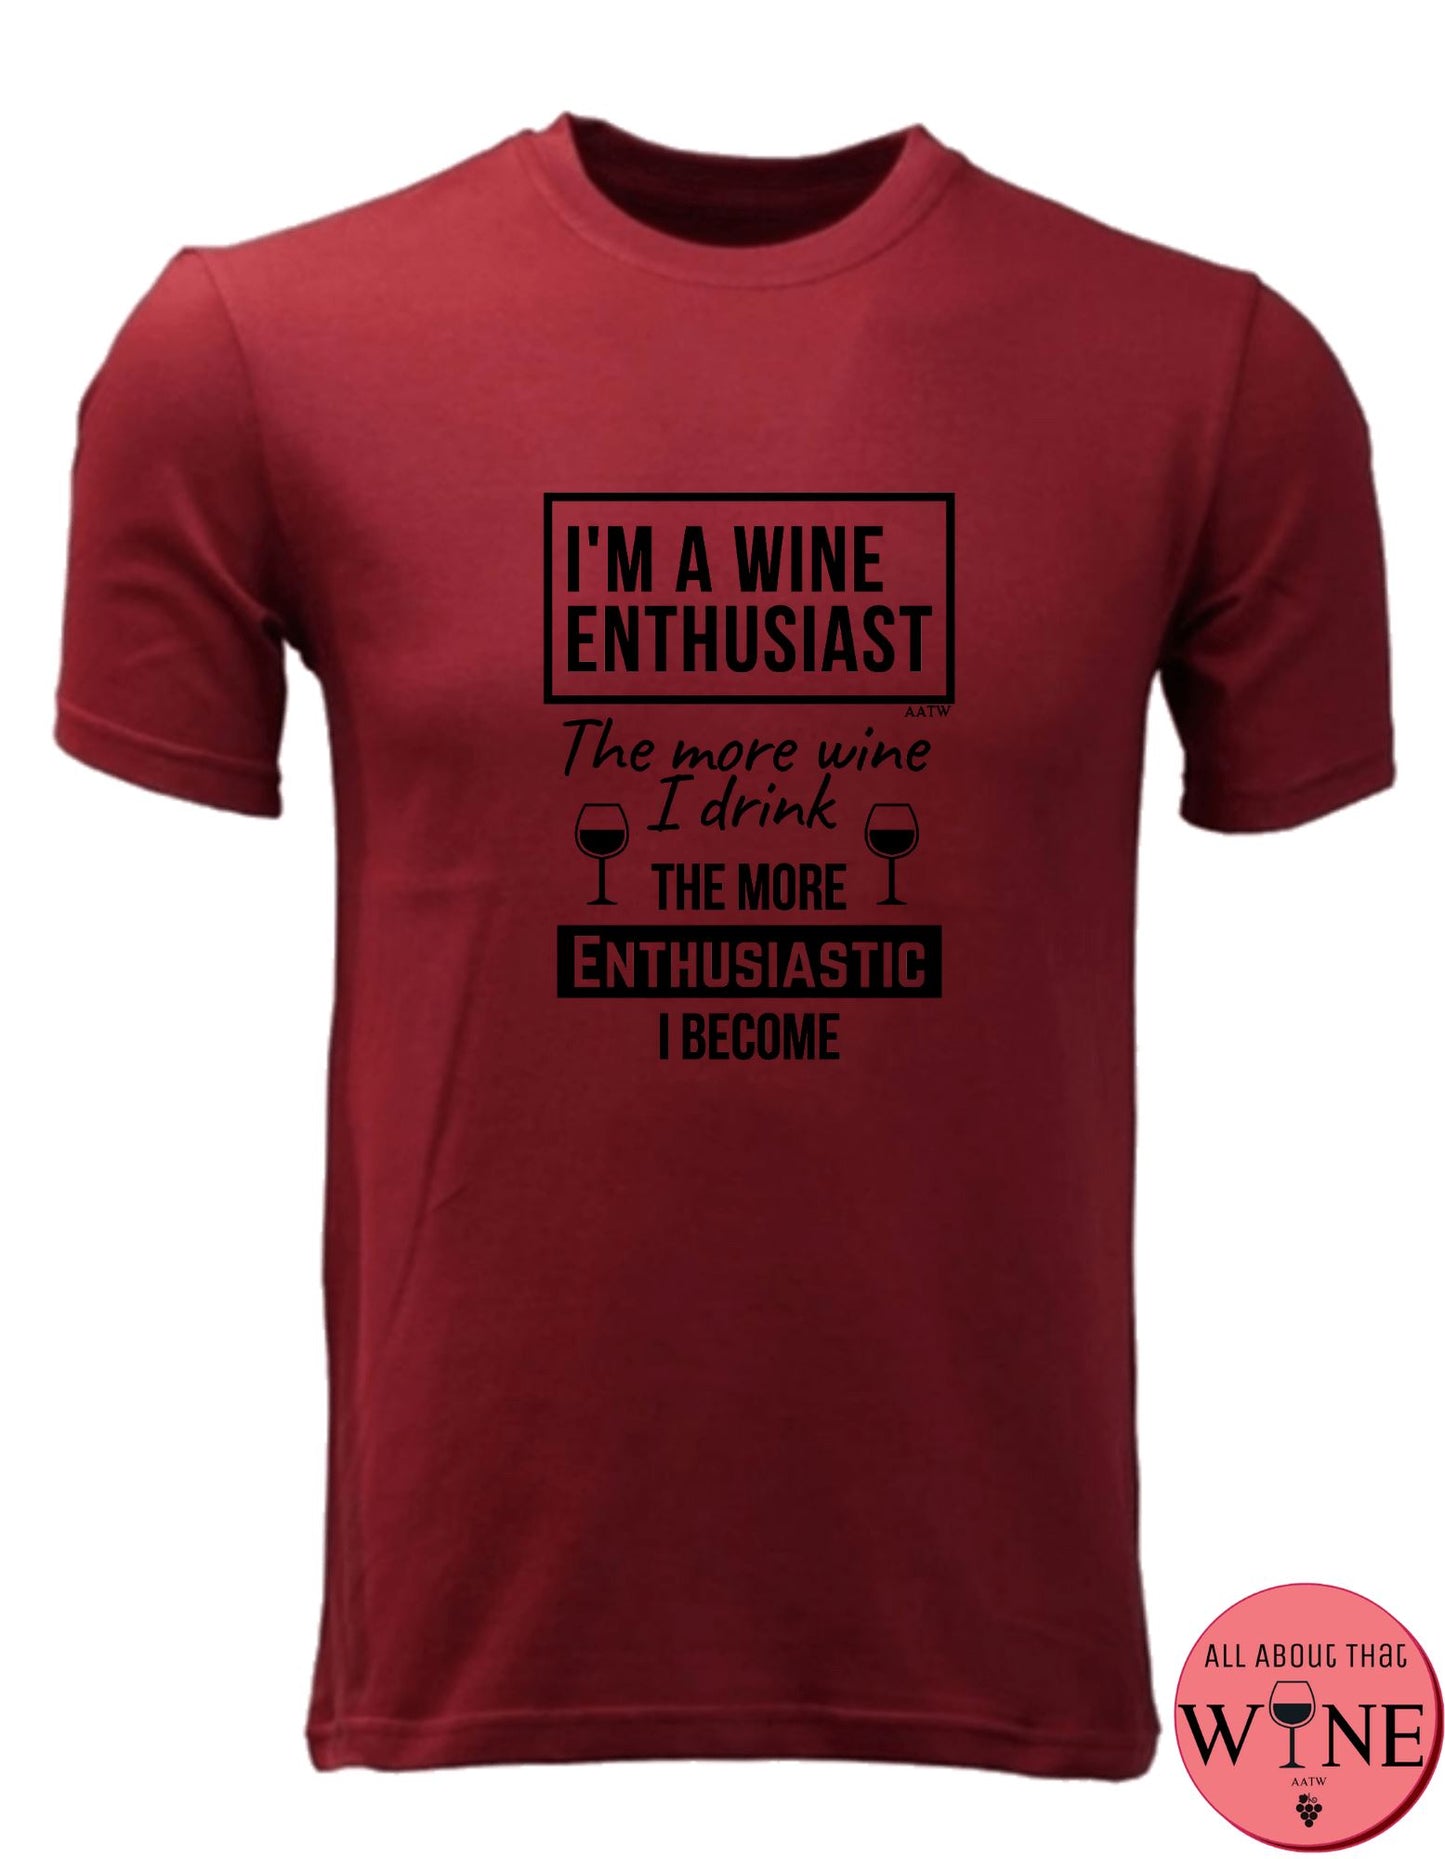 I'm A Wine Enthusiast - Unisex/Male M Deep red with black